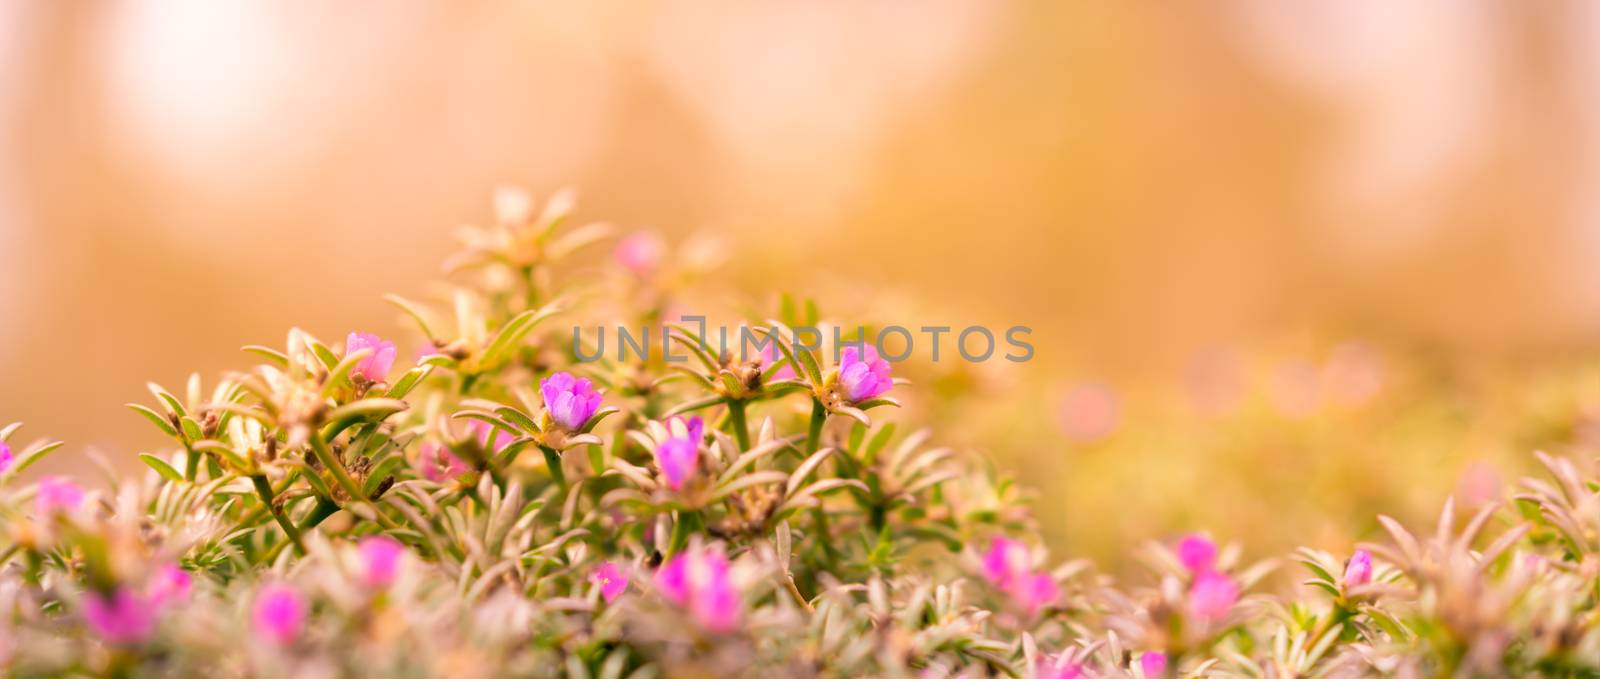 Good Morning Banner background with pink Portulaca flowers and yellow and orange tones